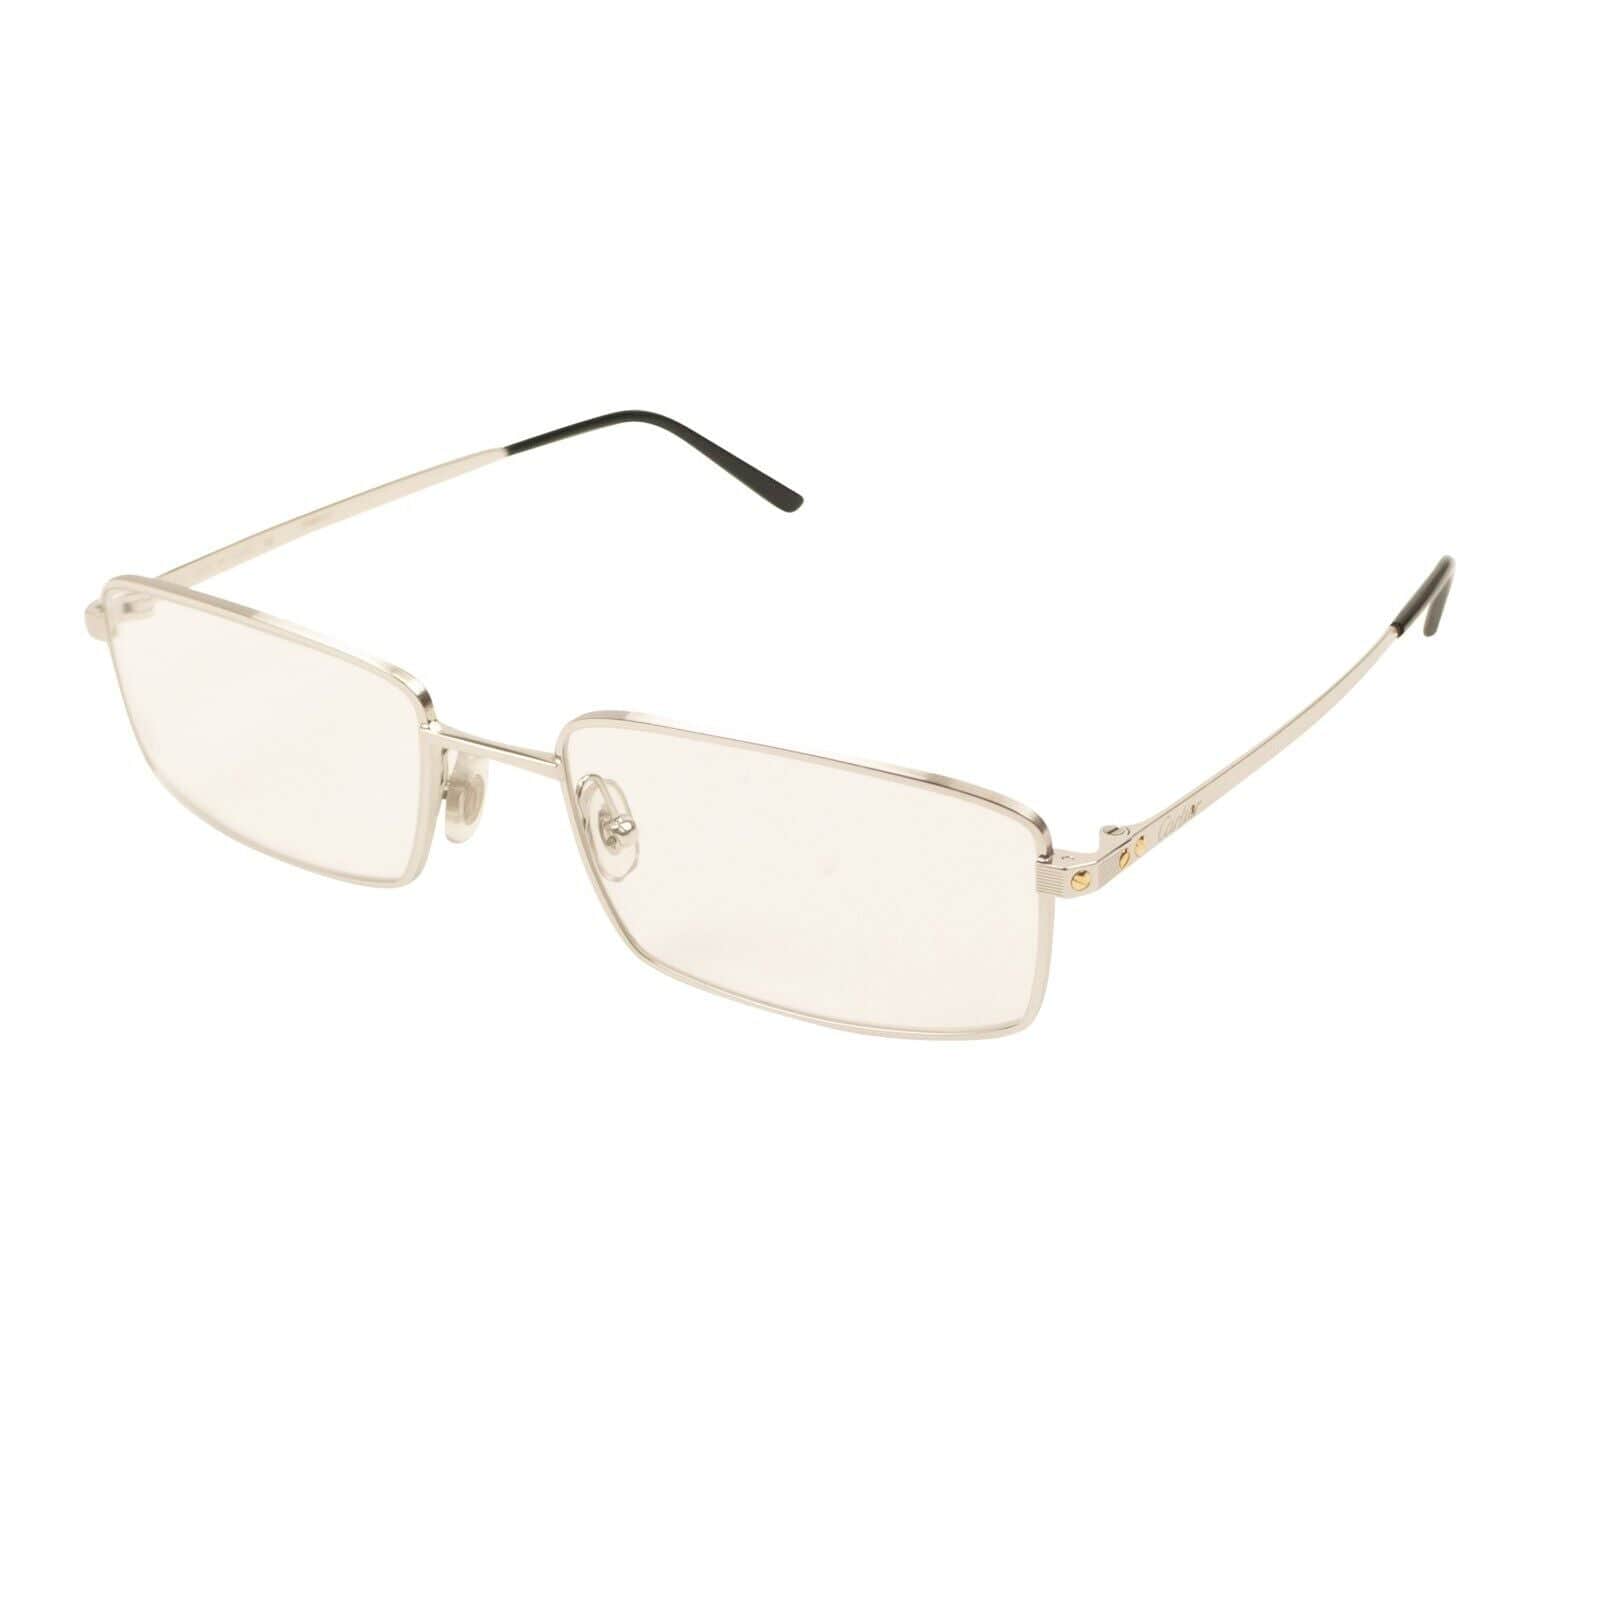 Cartier 1000-2000, channelenable-all, chicmi, couponcollection, gender-mens, main-accessories, mens-eyewear, mens-shoes, size-os OS Silver CT0085O-001 Rectangular Eyeglasses 95-CRT-3043/OS 95-CRT-3043/OS